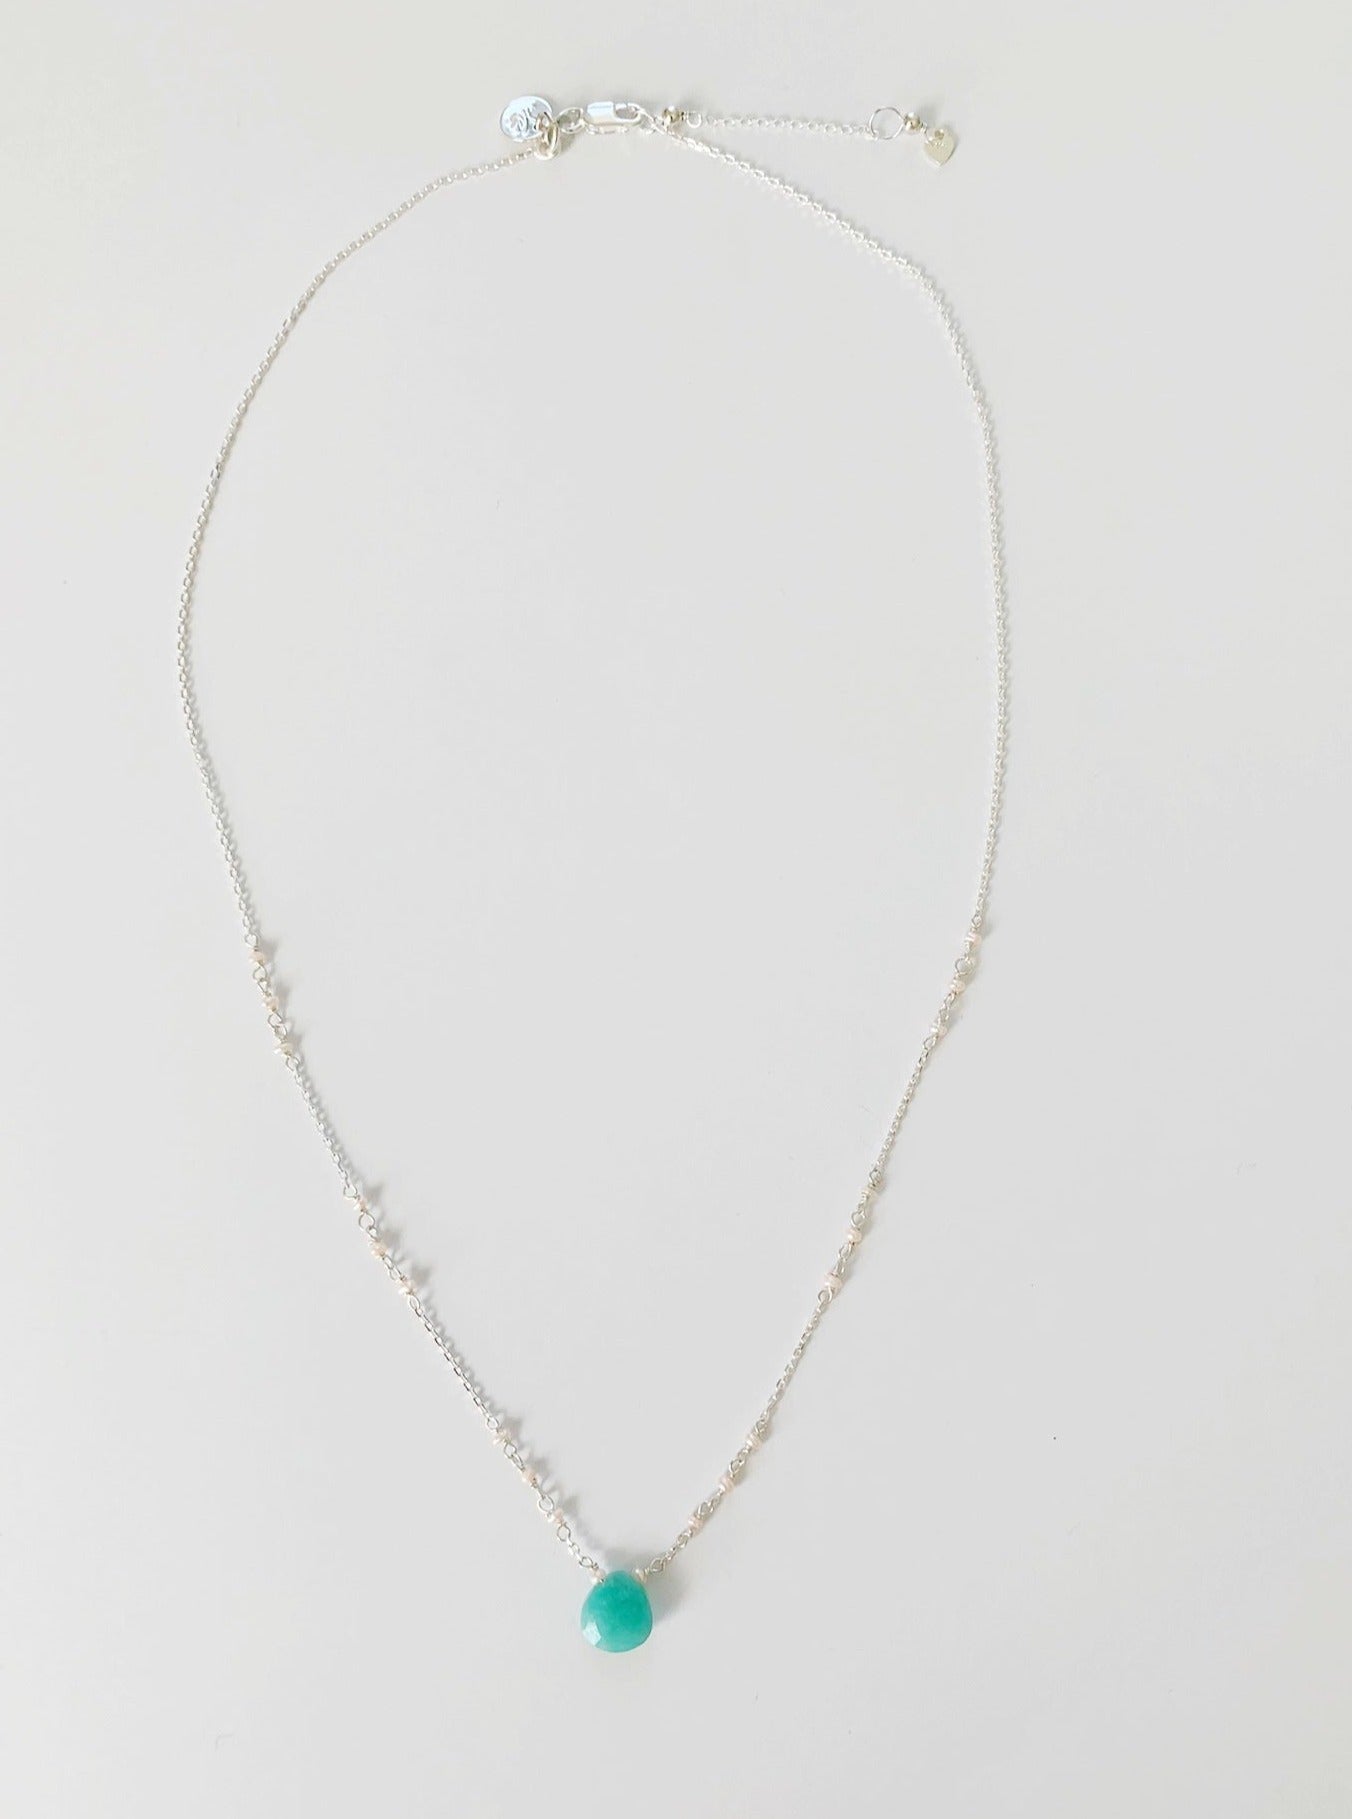 A full length view of the Island Air necklace by Mermaids and Madeleines. The necklace features a bright aqua briolette at the center and freshwater pearls wired into the sterling silver chain. This necklace is photographed on a white background